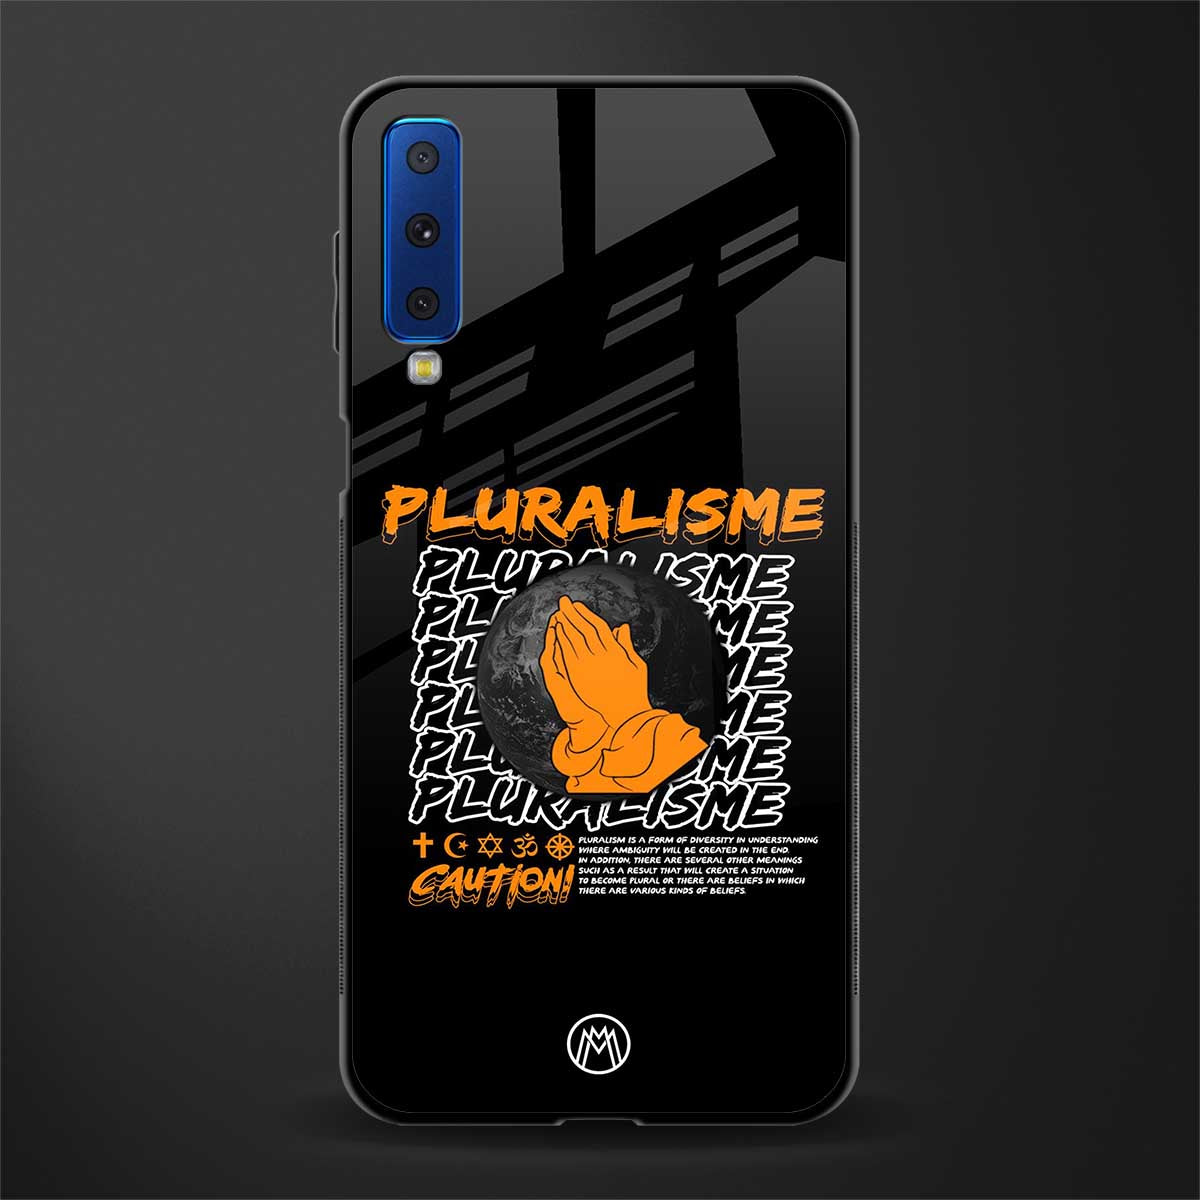 pluralisme glass case for samsung galaxy a7 2018 image